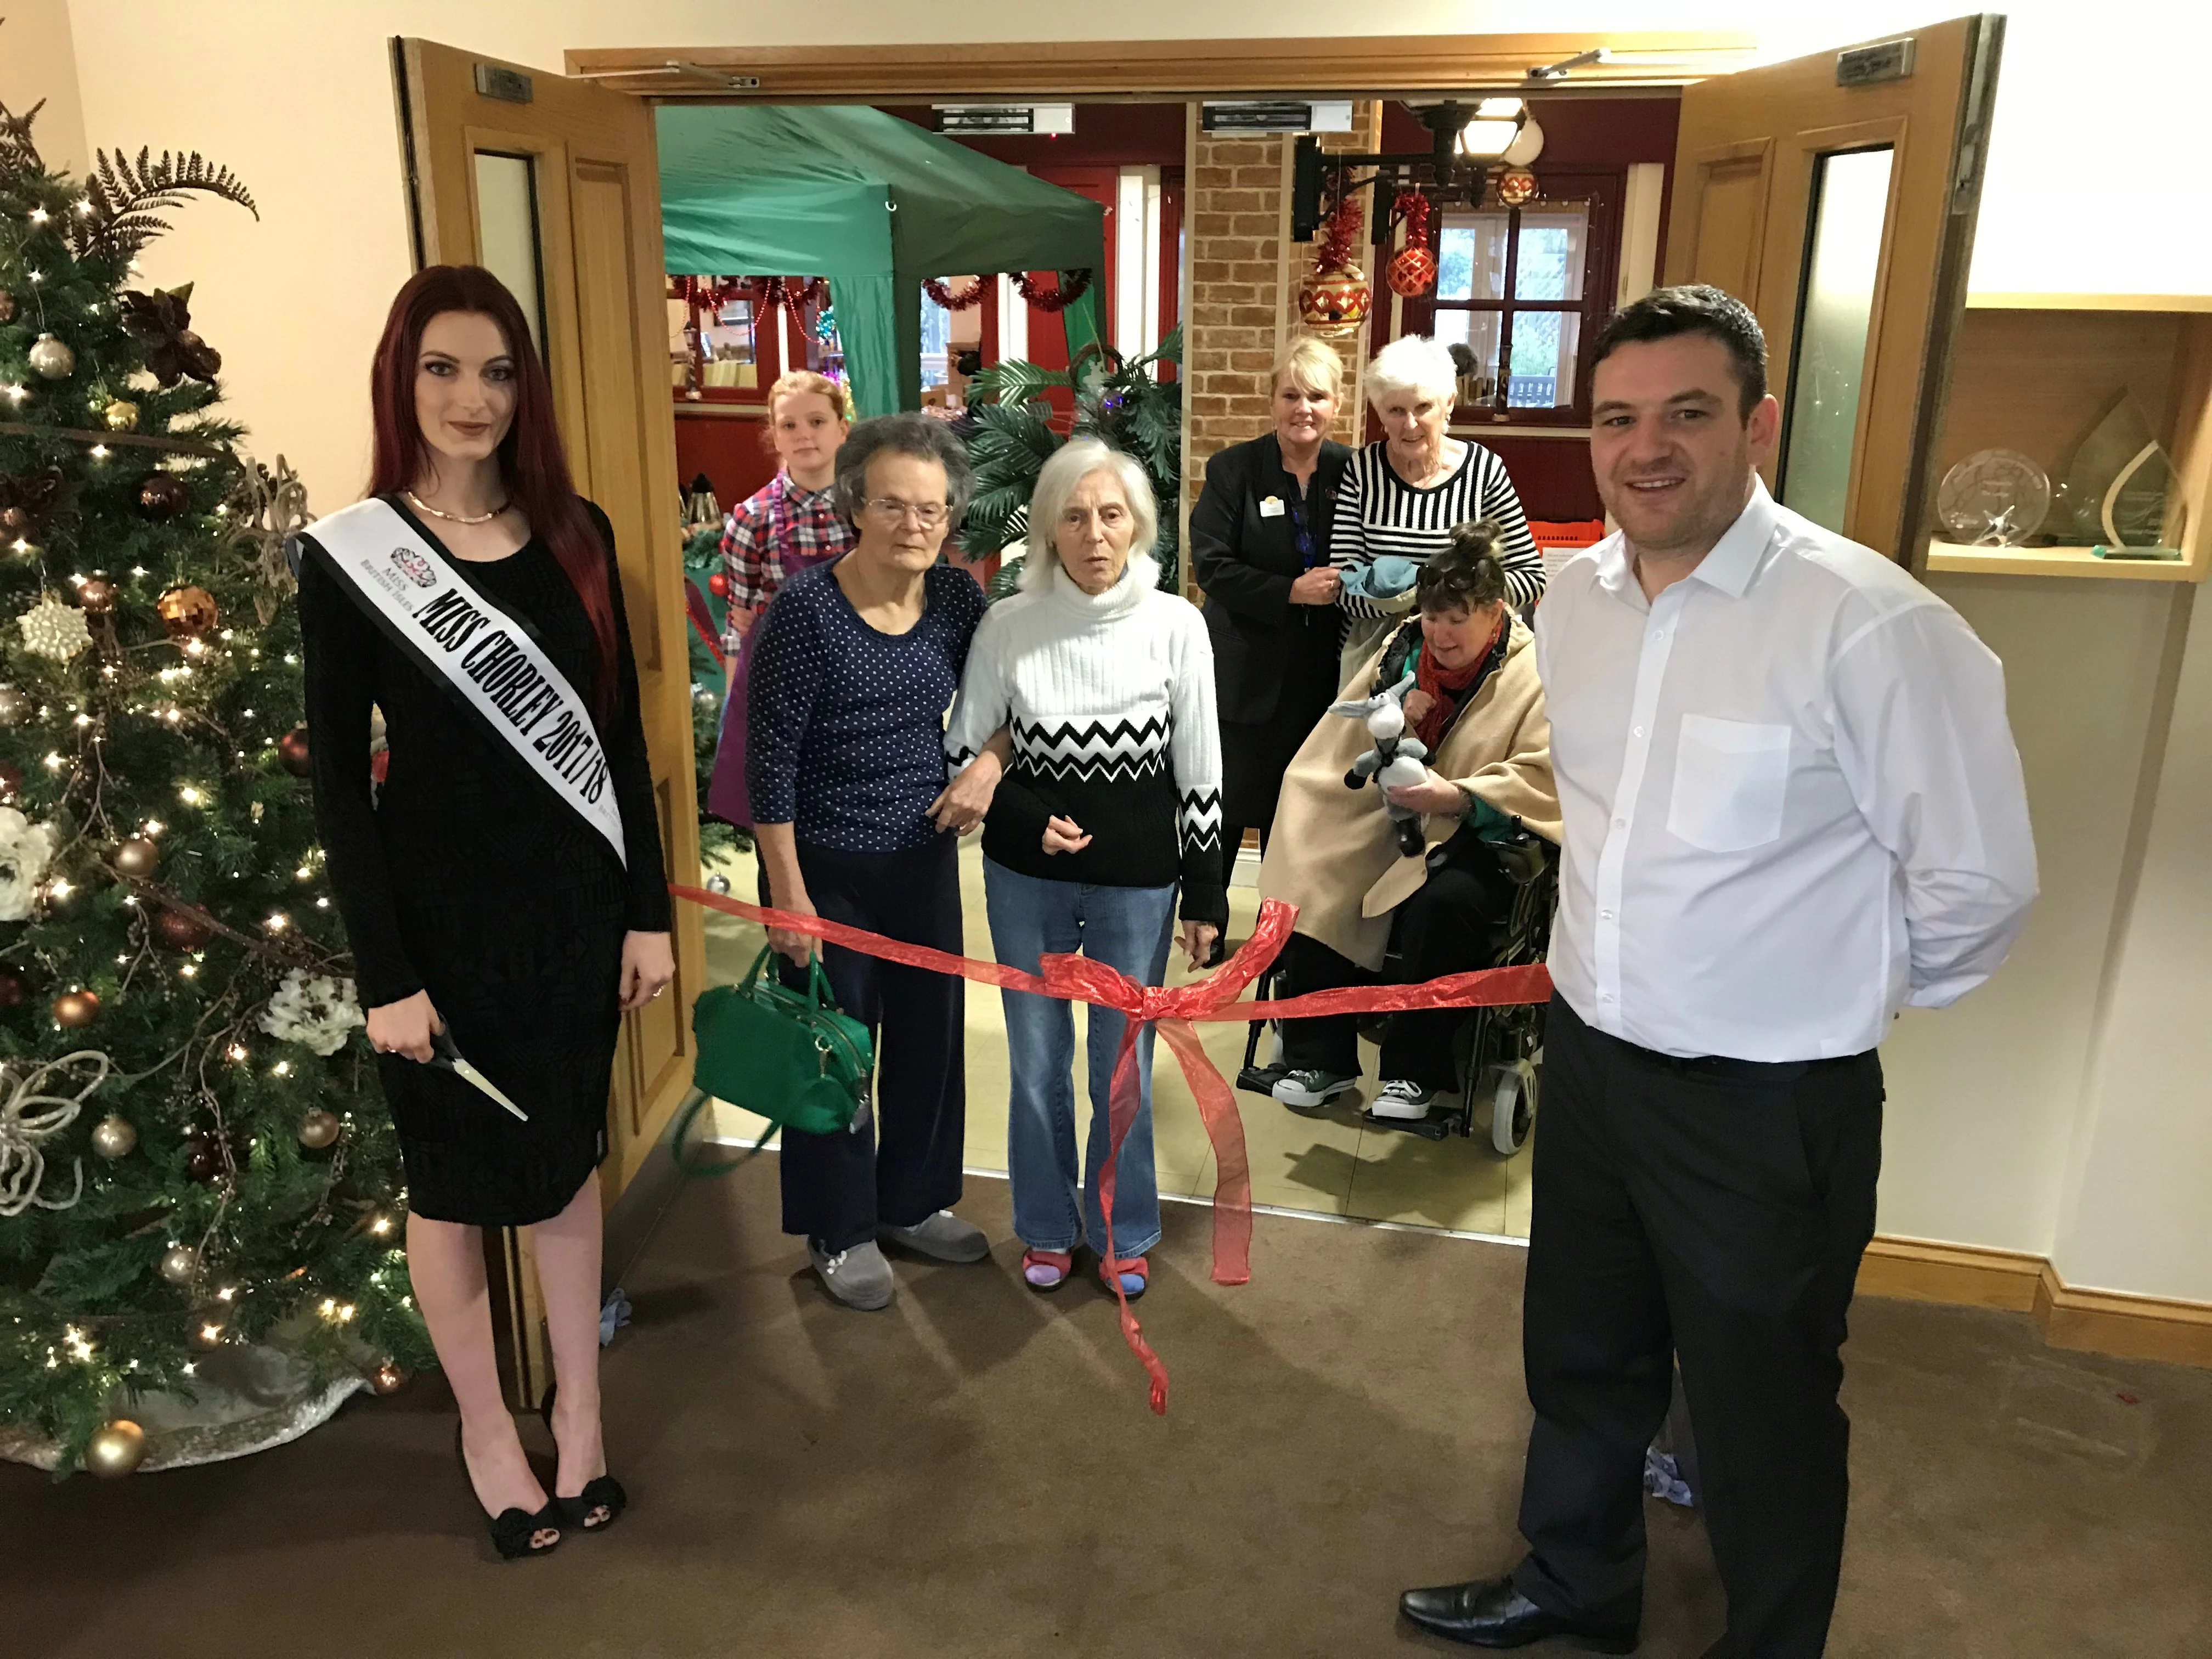 Miss Chorley opening the market, alongside residents, staff, members of the public and Market Square coordinator Chris Durnan 